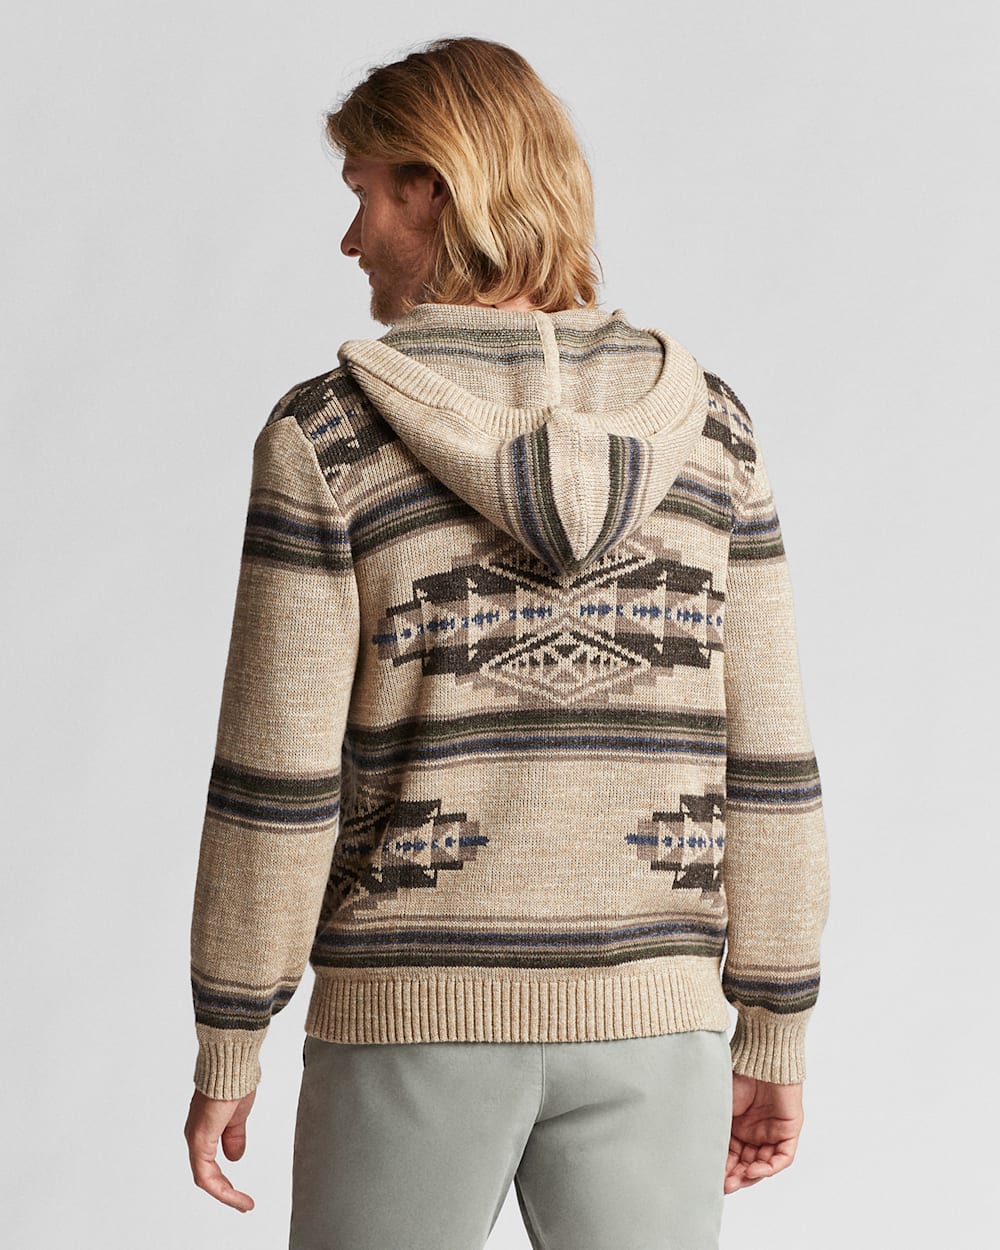 ALTERNATE VIEW OF MEN'S COTTON SWEATER HOODIE IN OATMEAL MIX image number 2